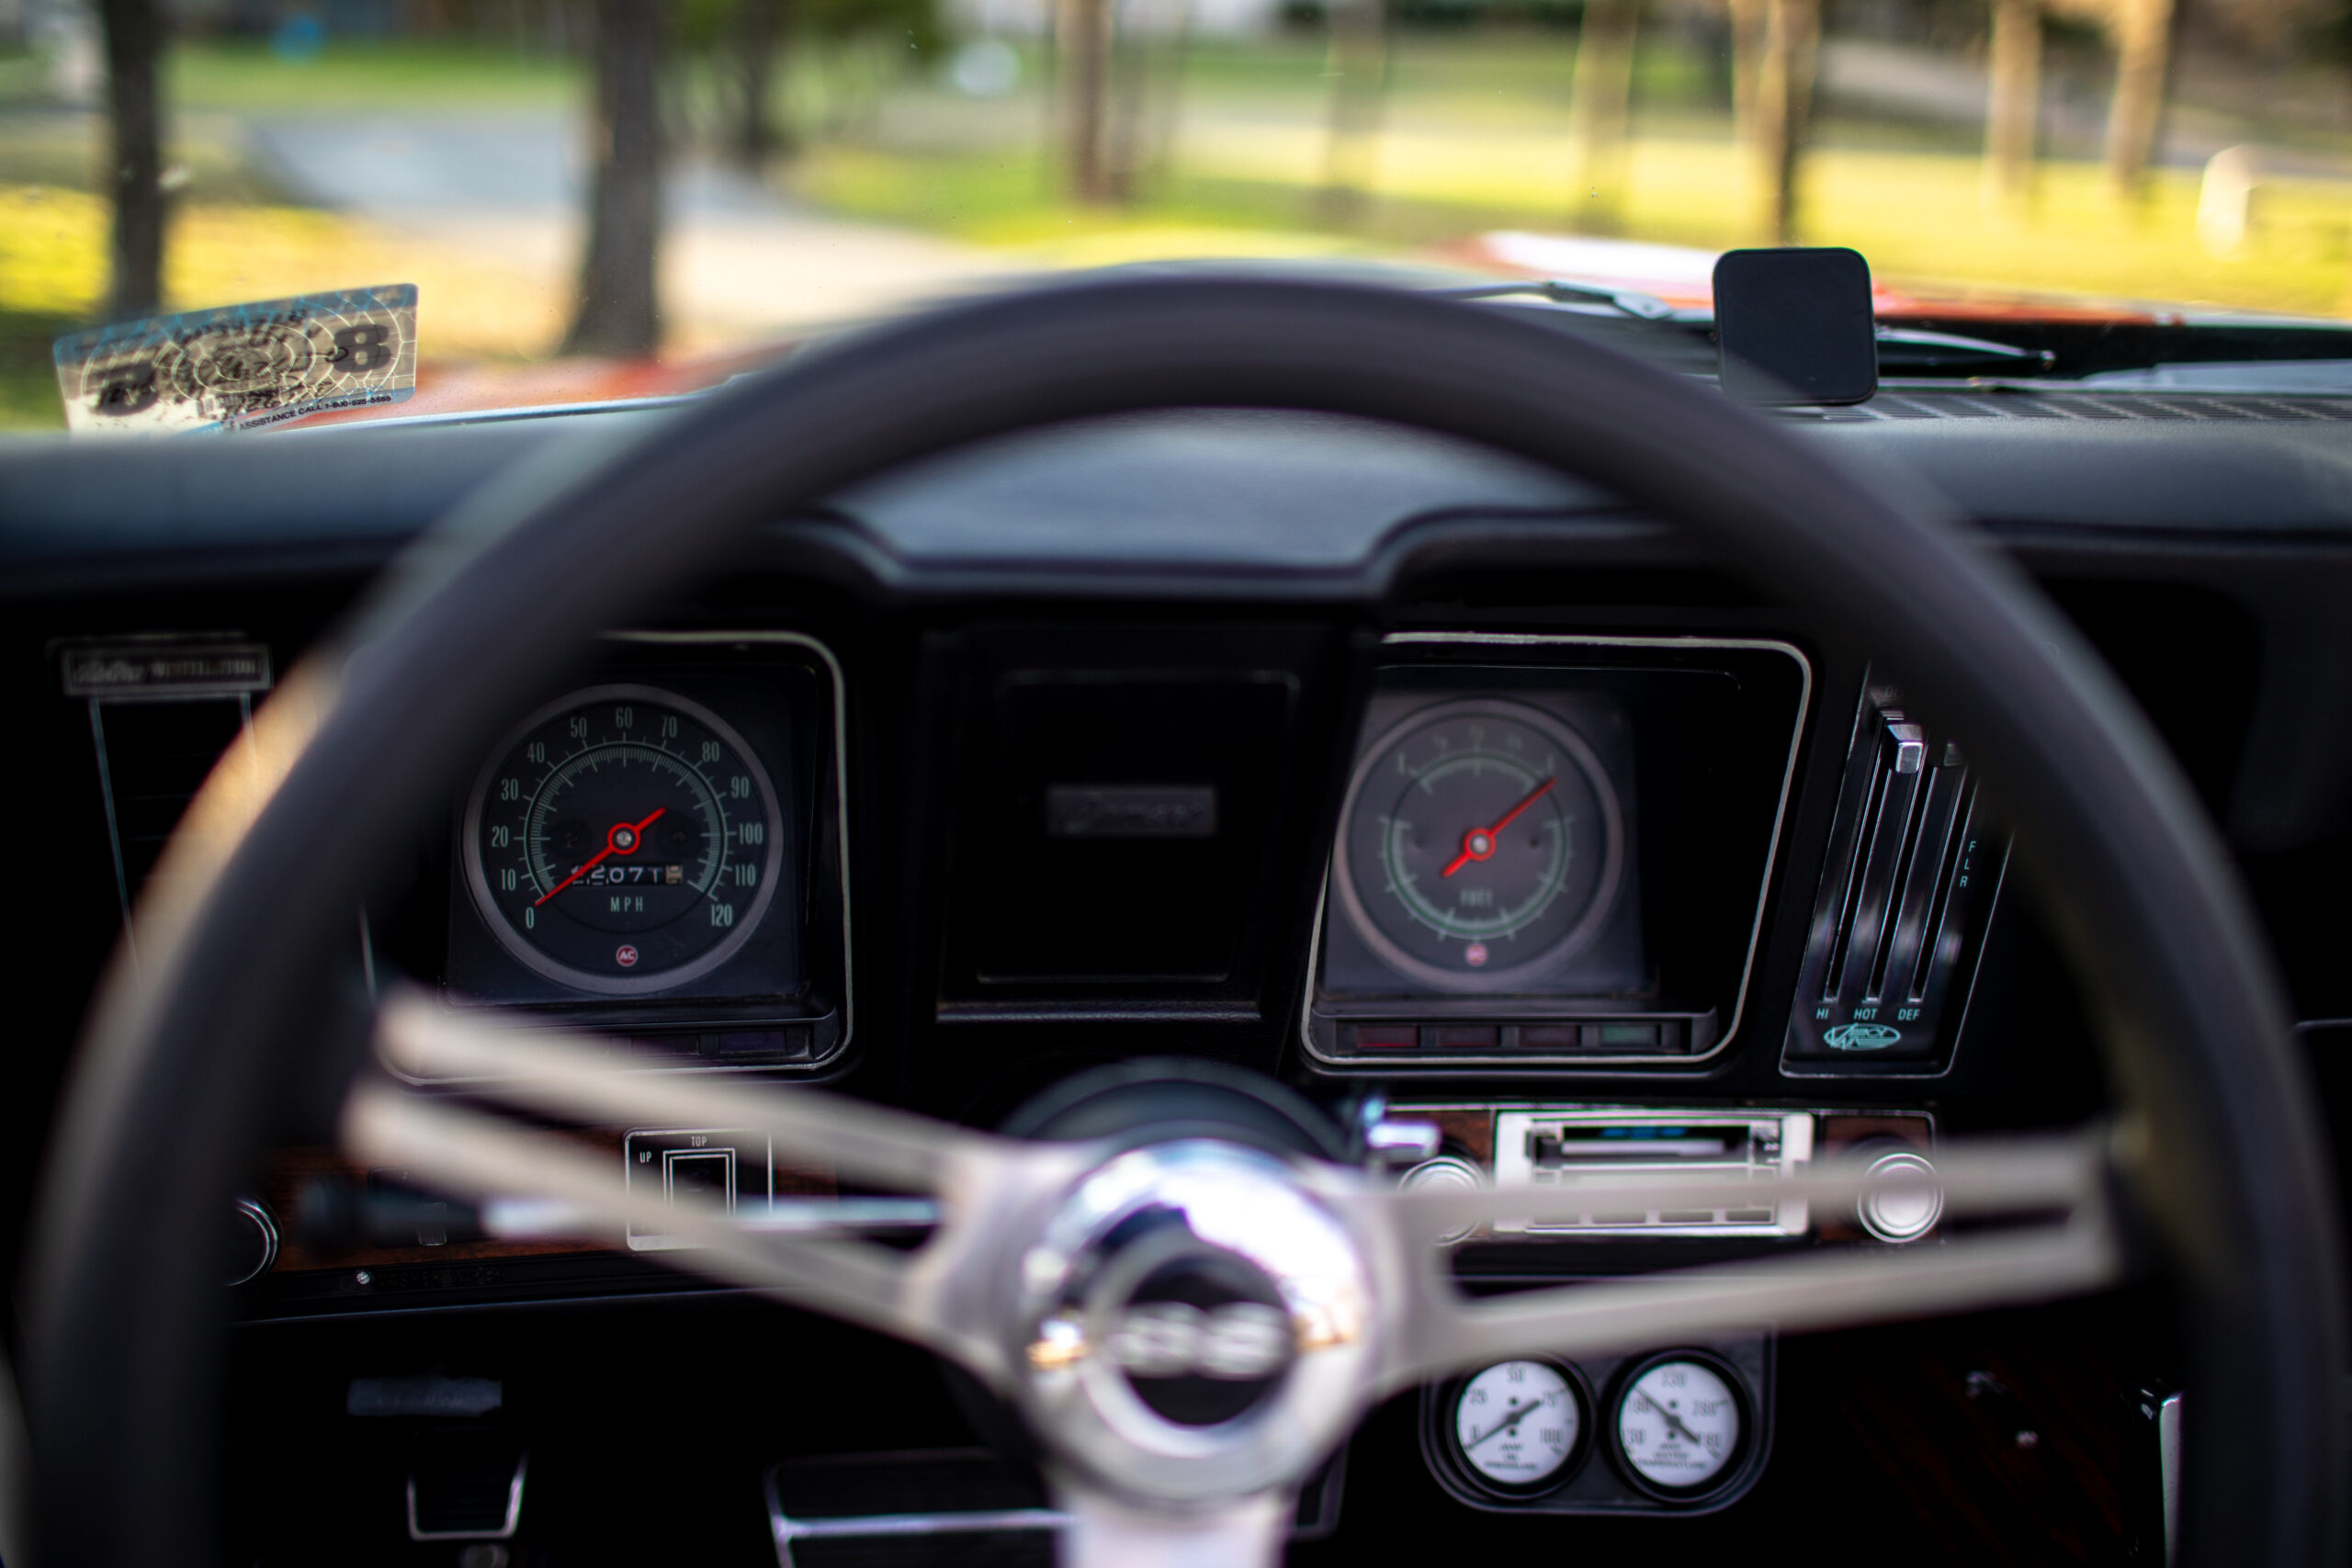 Interior view of a car dashboard displaying speedometer, tachometer, and other gauges behind the steering wheel, with a blurred background observed through the windshield.